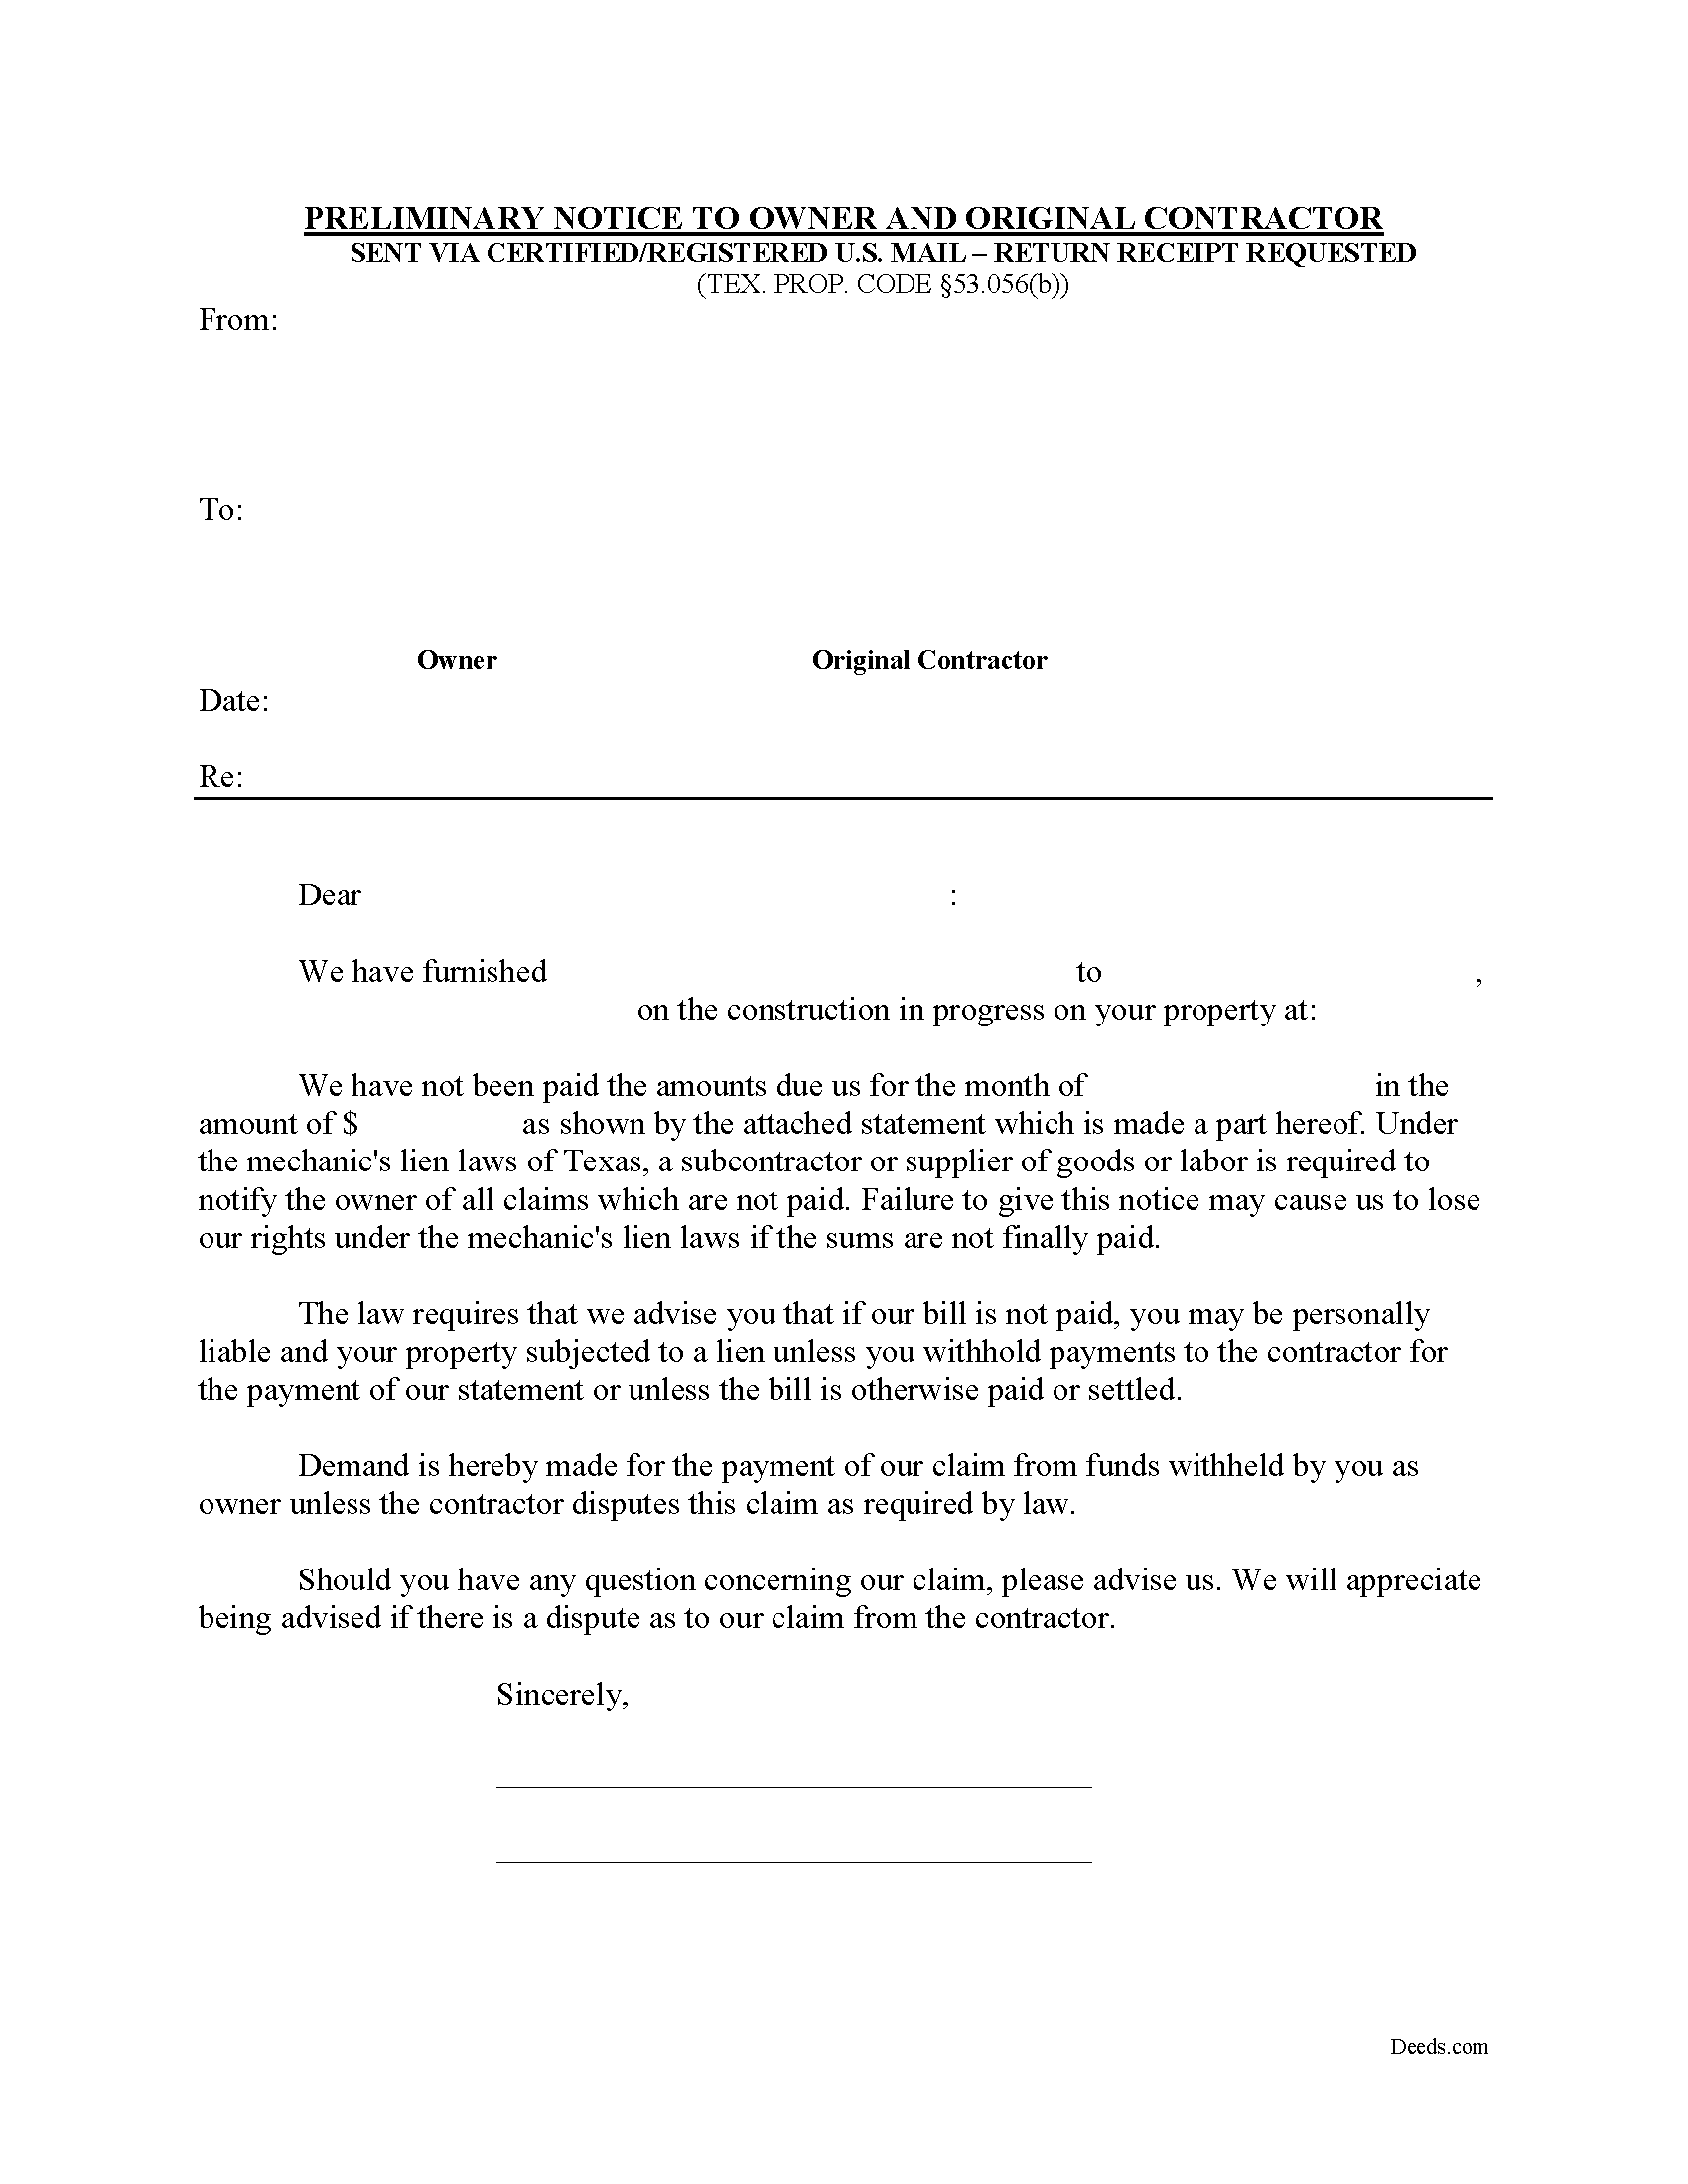 Preliminary Notice to Owner and Original Contractor Form